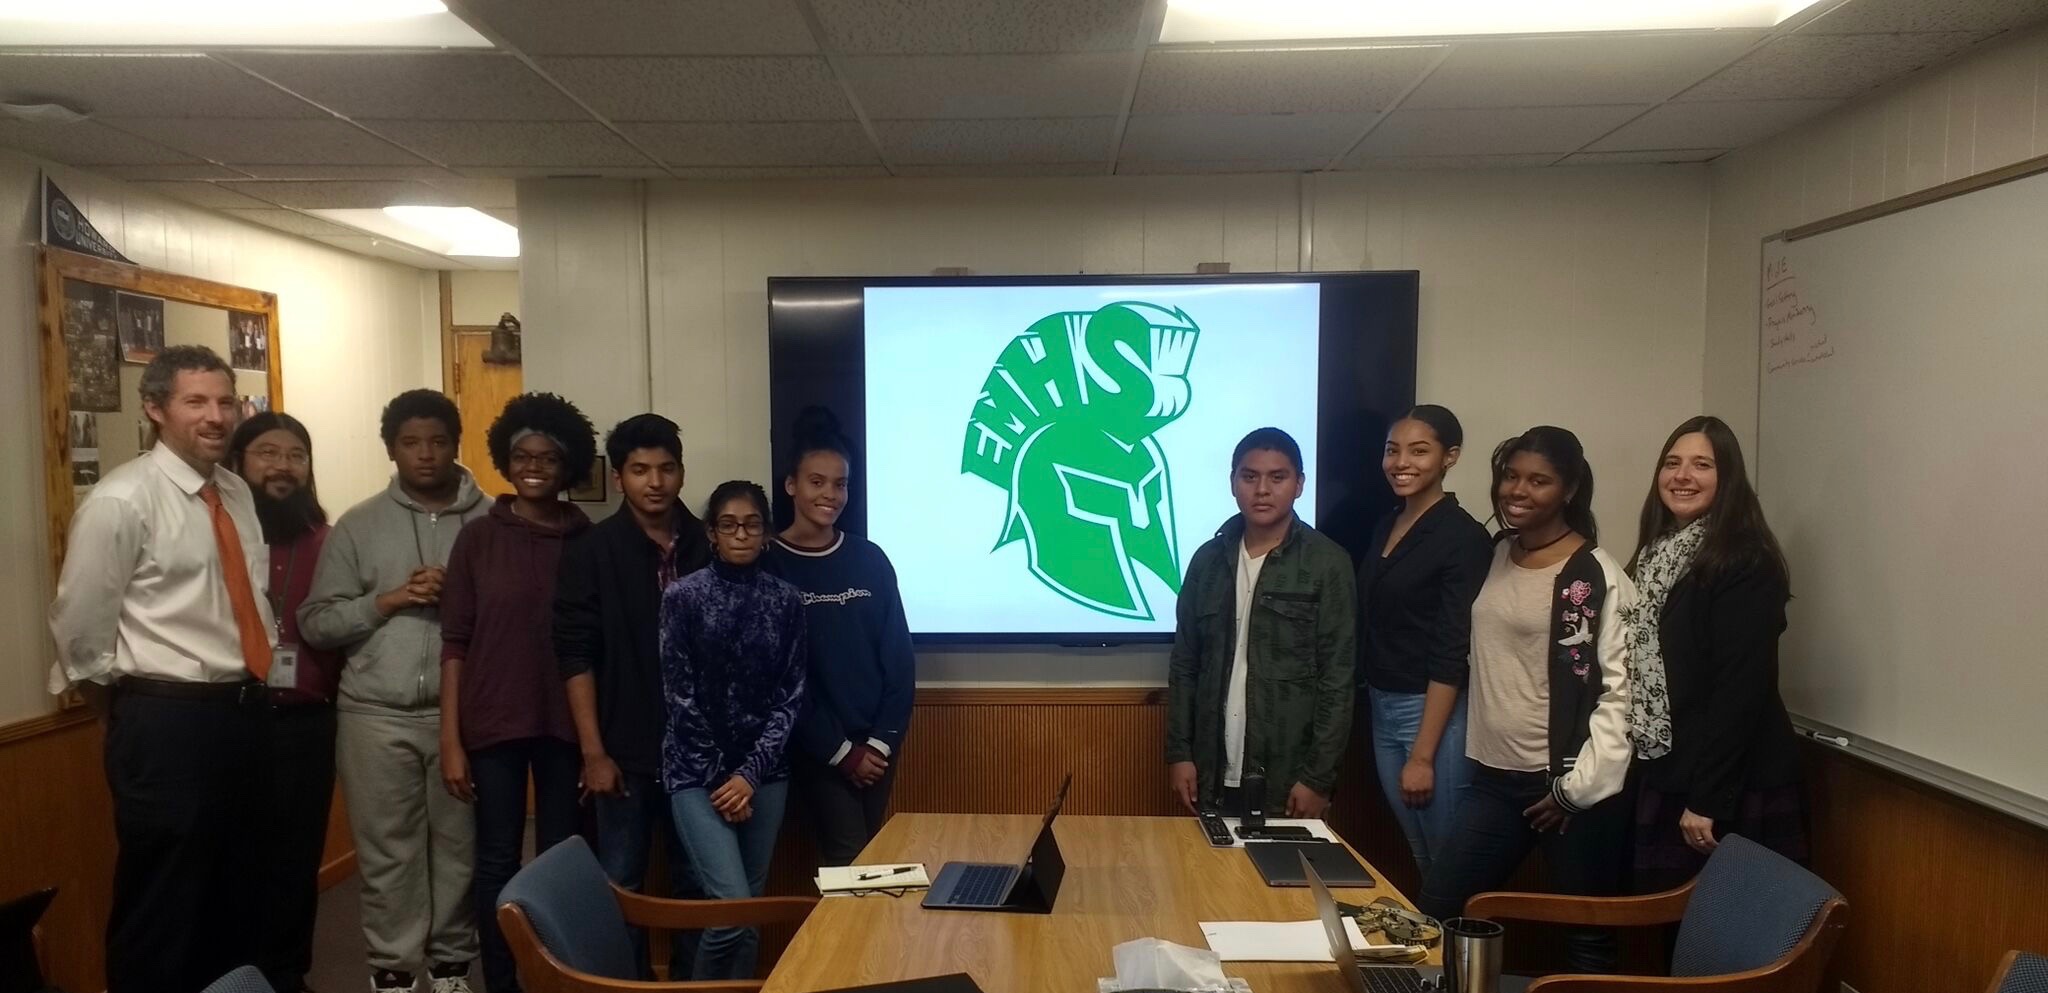 students-create-a-new-logo-for-elmont-memorial-high-school-community